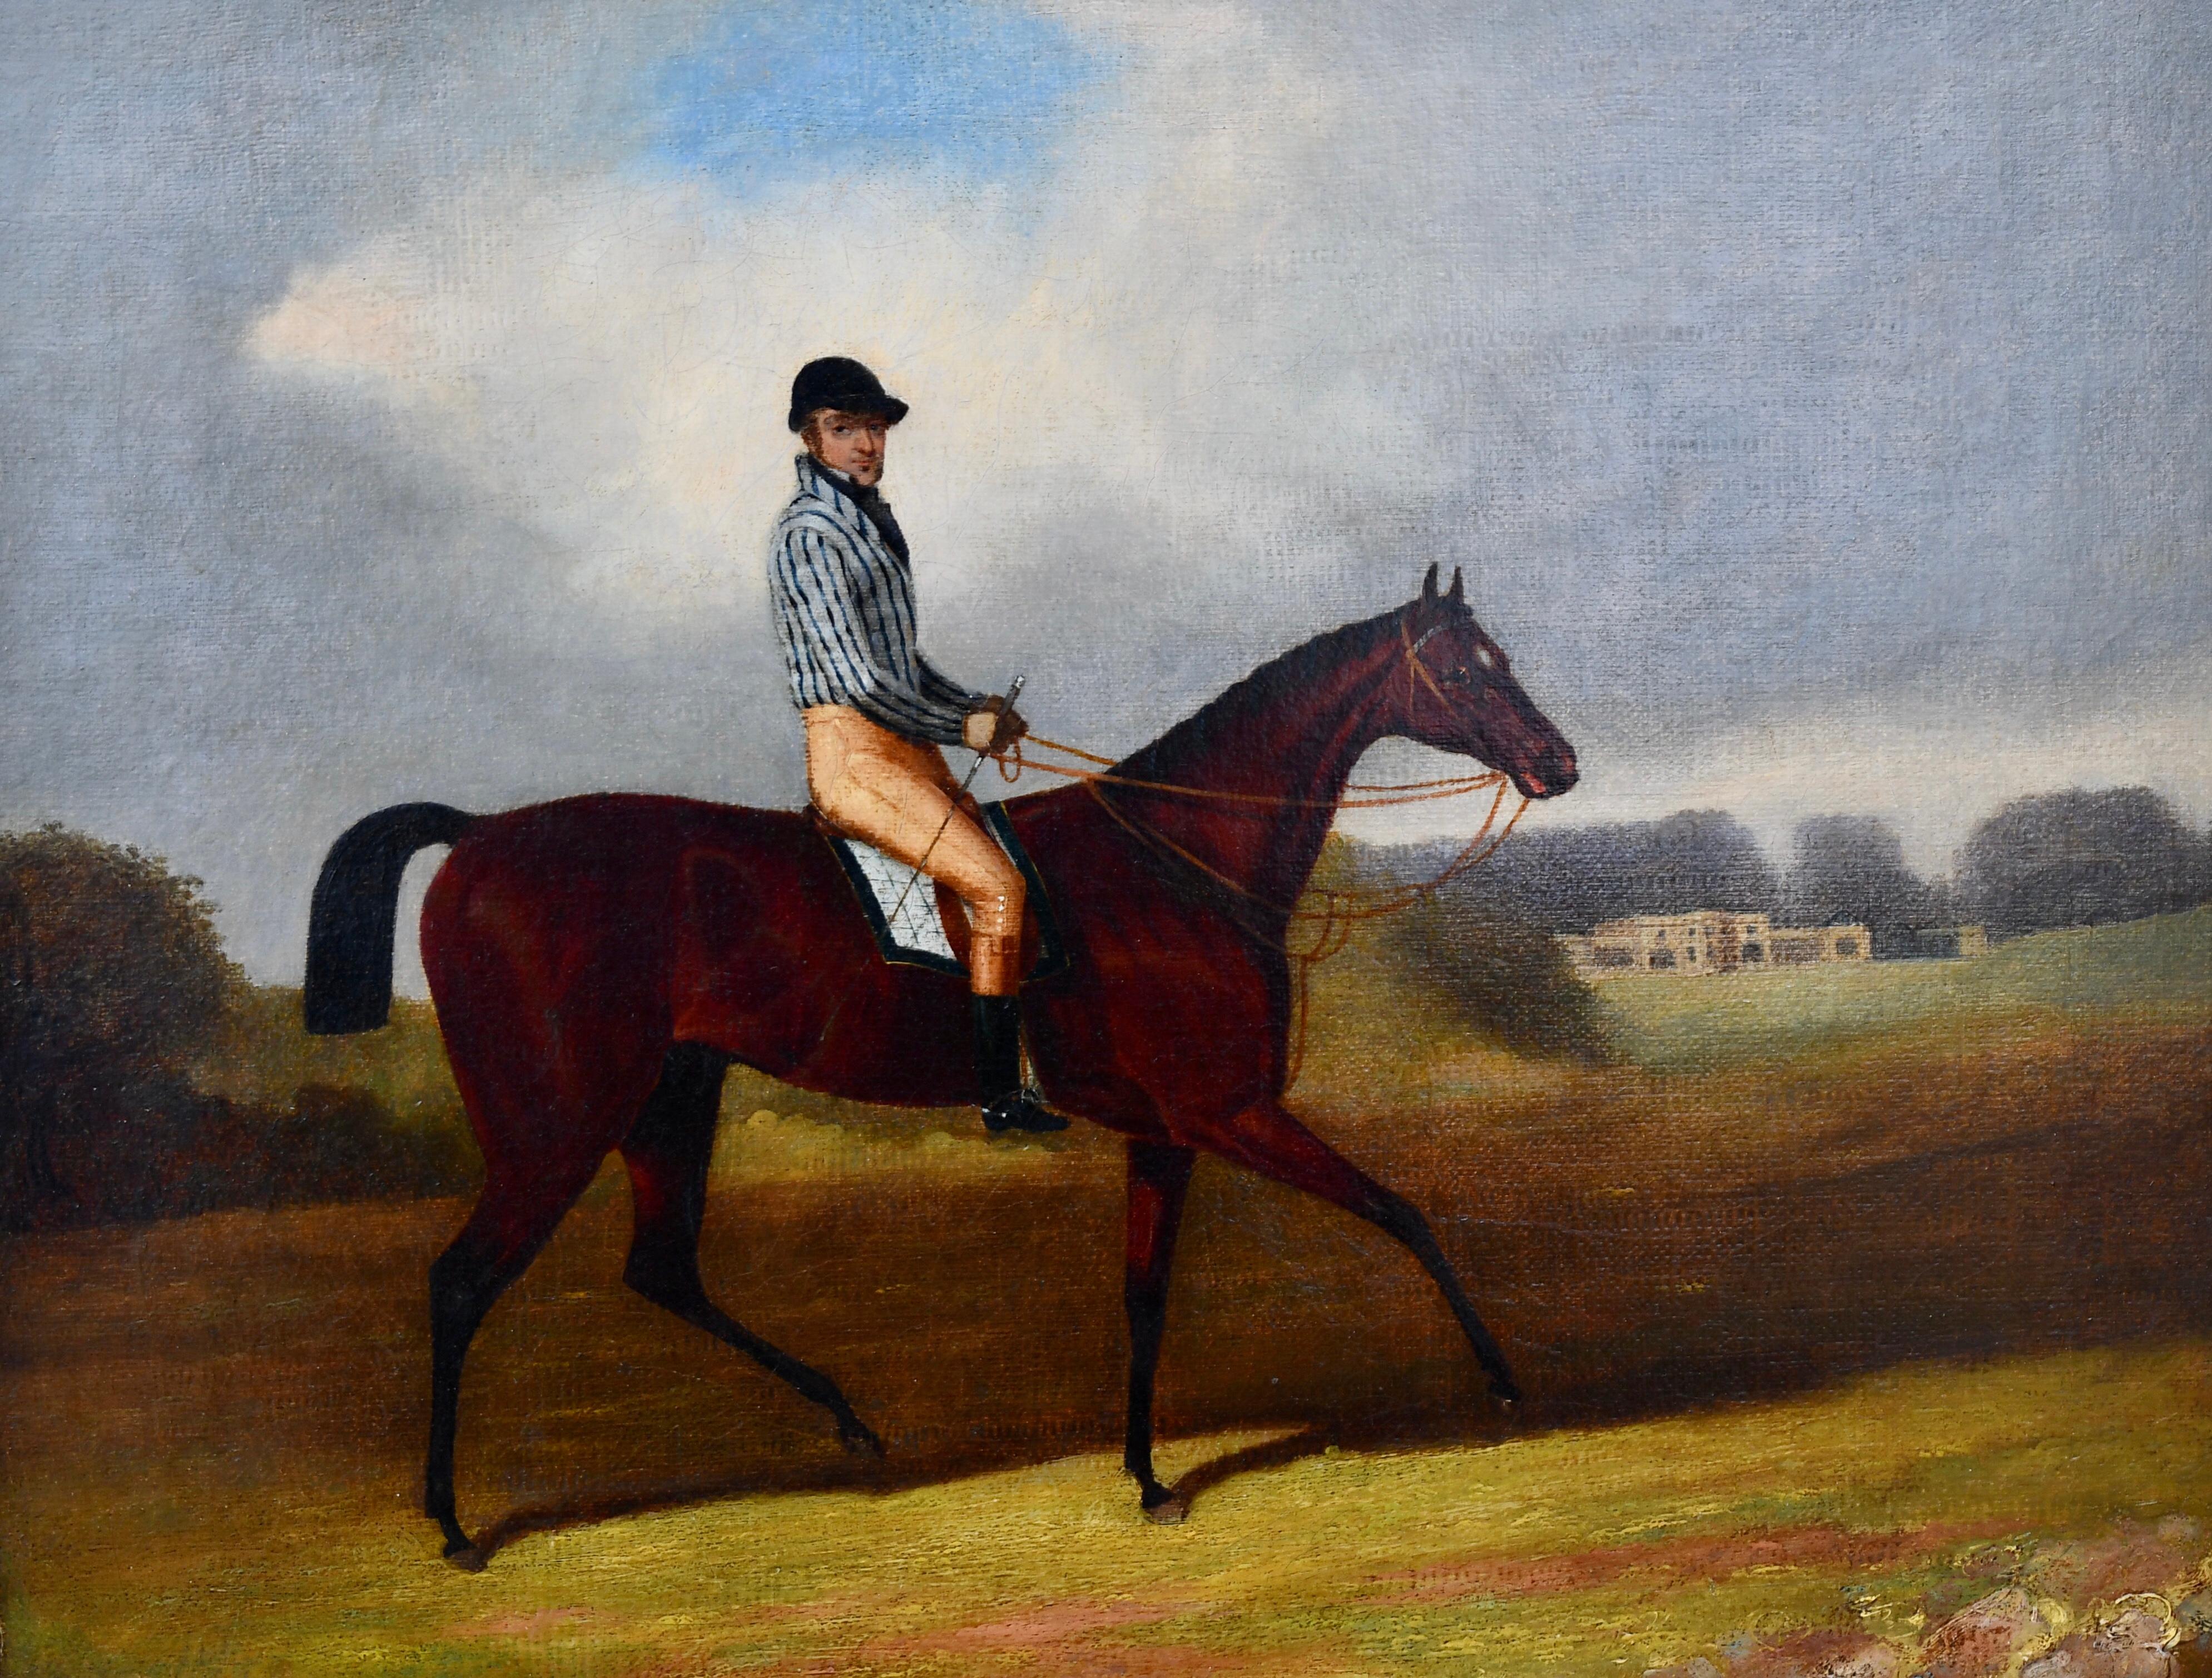 Well-executed oil on canvas featuring a horse and jockey in a beautiful English countryside landscape. This piece dates to the second half of the 19th century and is very mush in the style and quality of painters such as John Sartorius and Harry